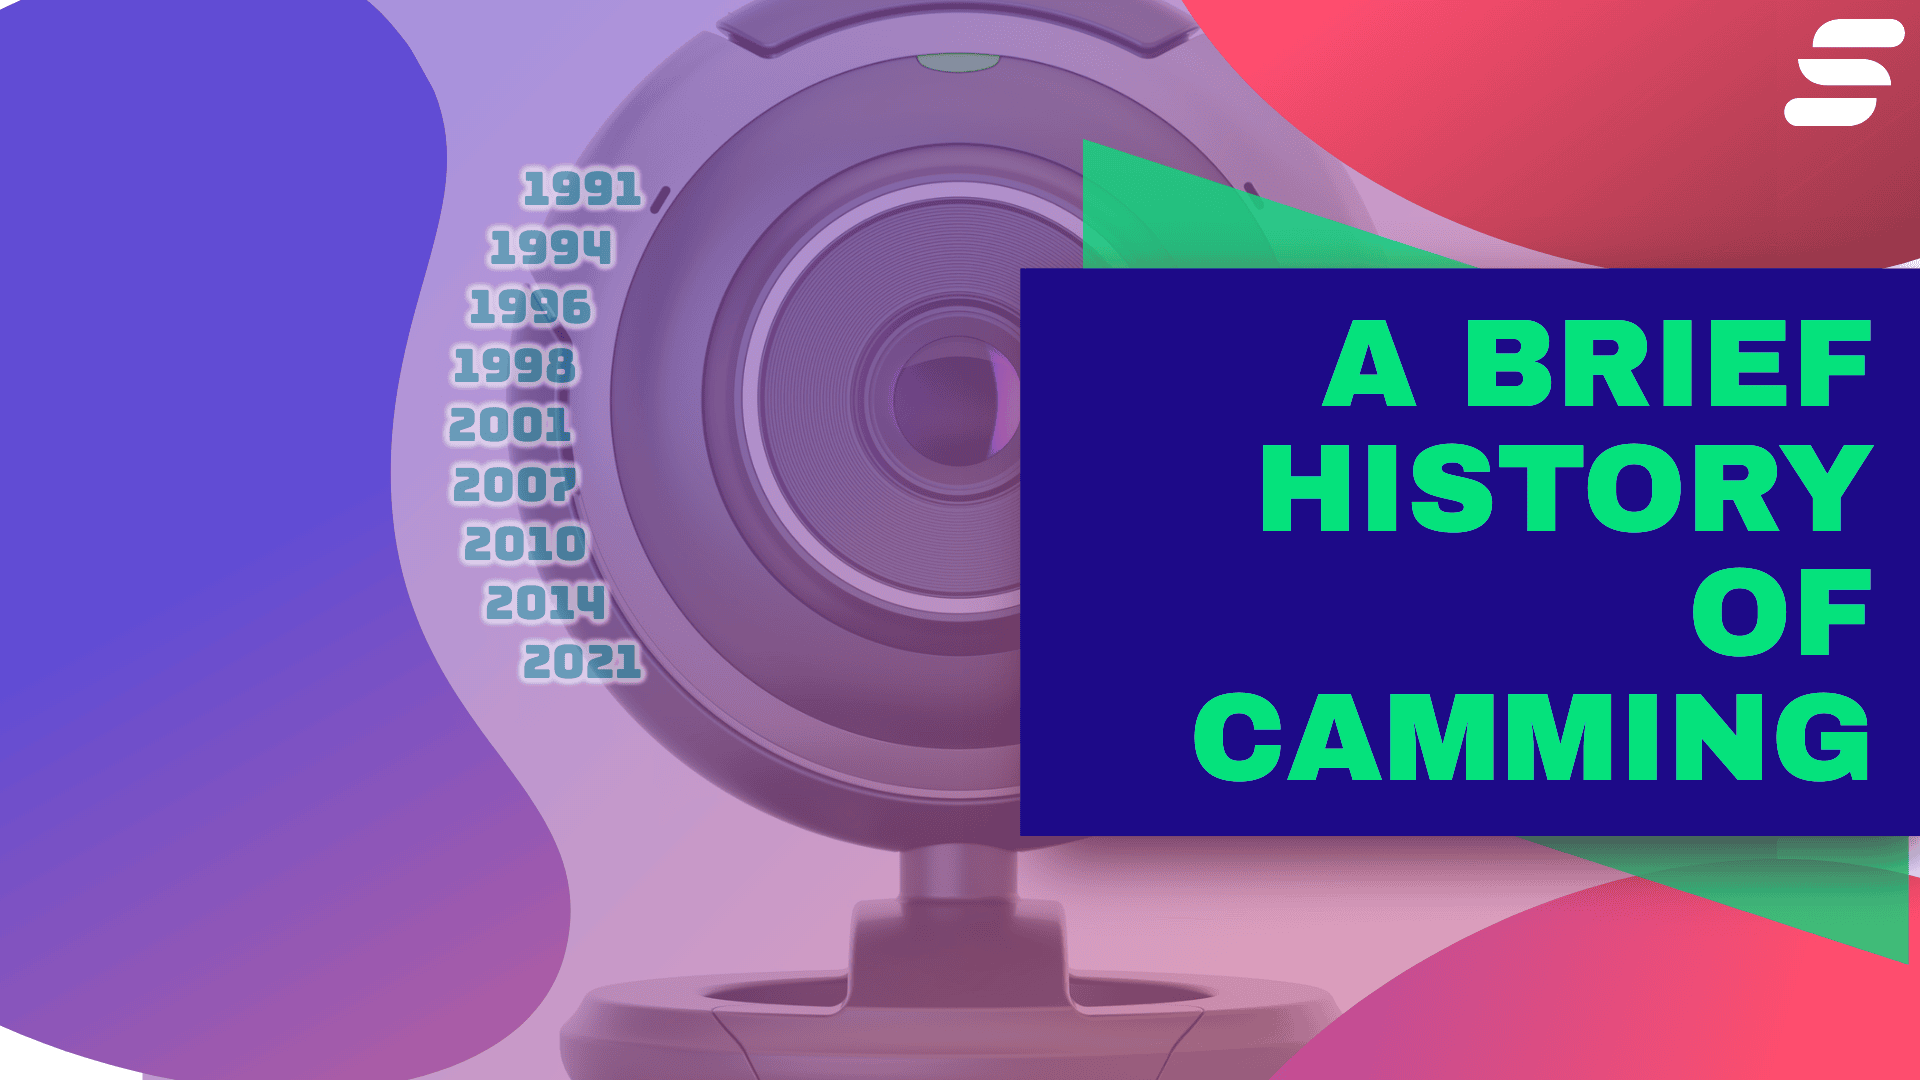 Jennicam- A Brief History of Camming